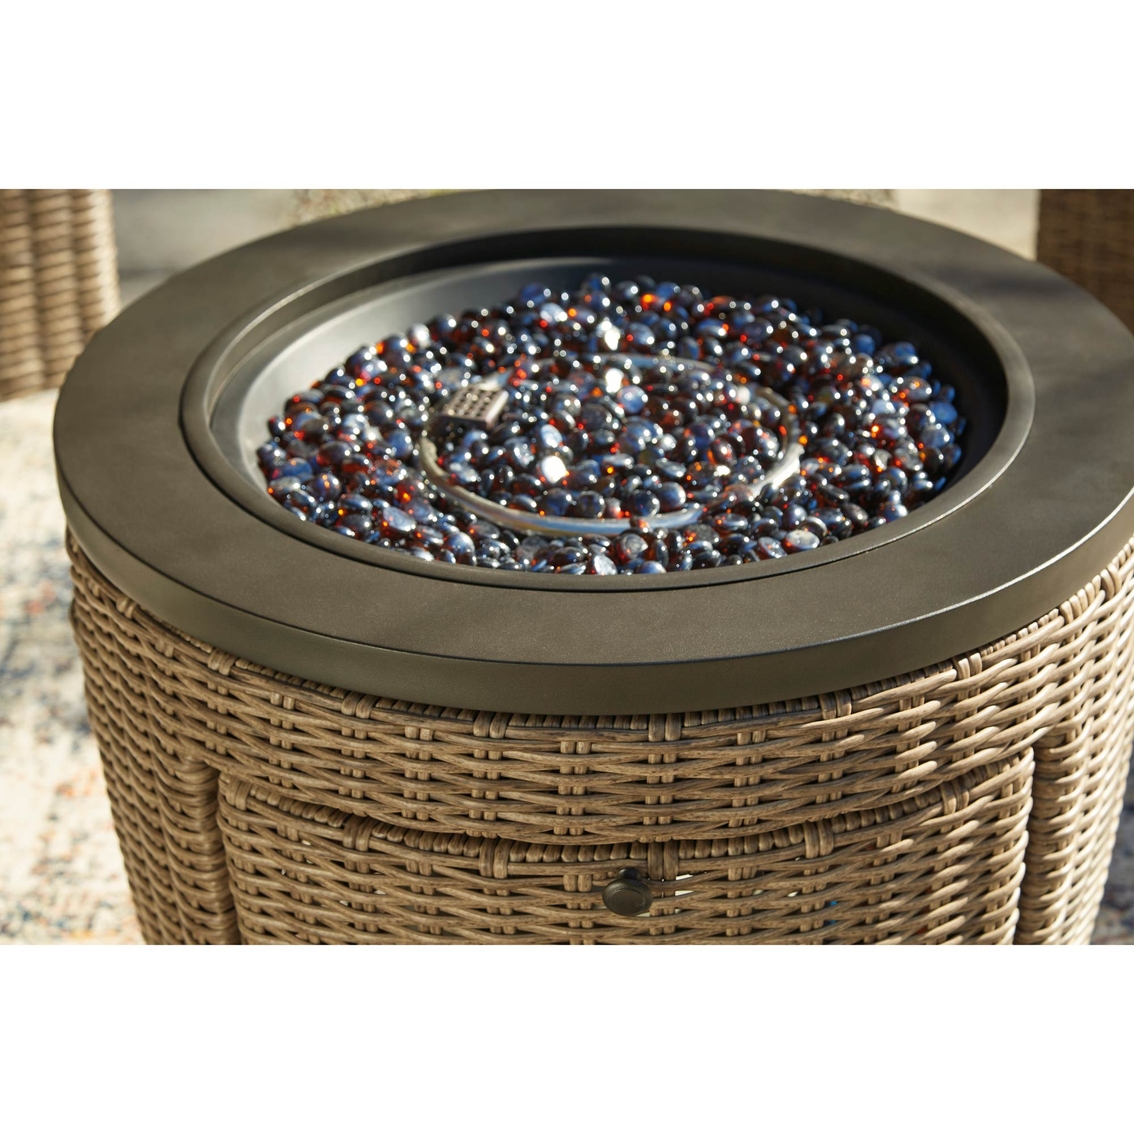 Signature Design by Ashley Malayah Fire Pit 3 pc. Set - Image 10 of 10